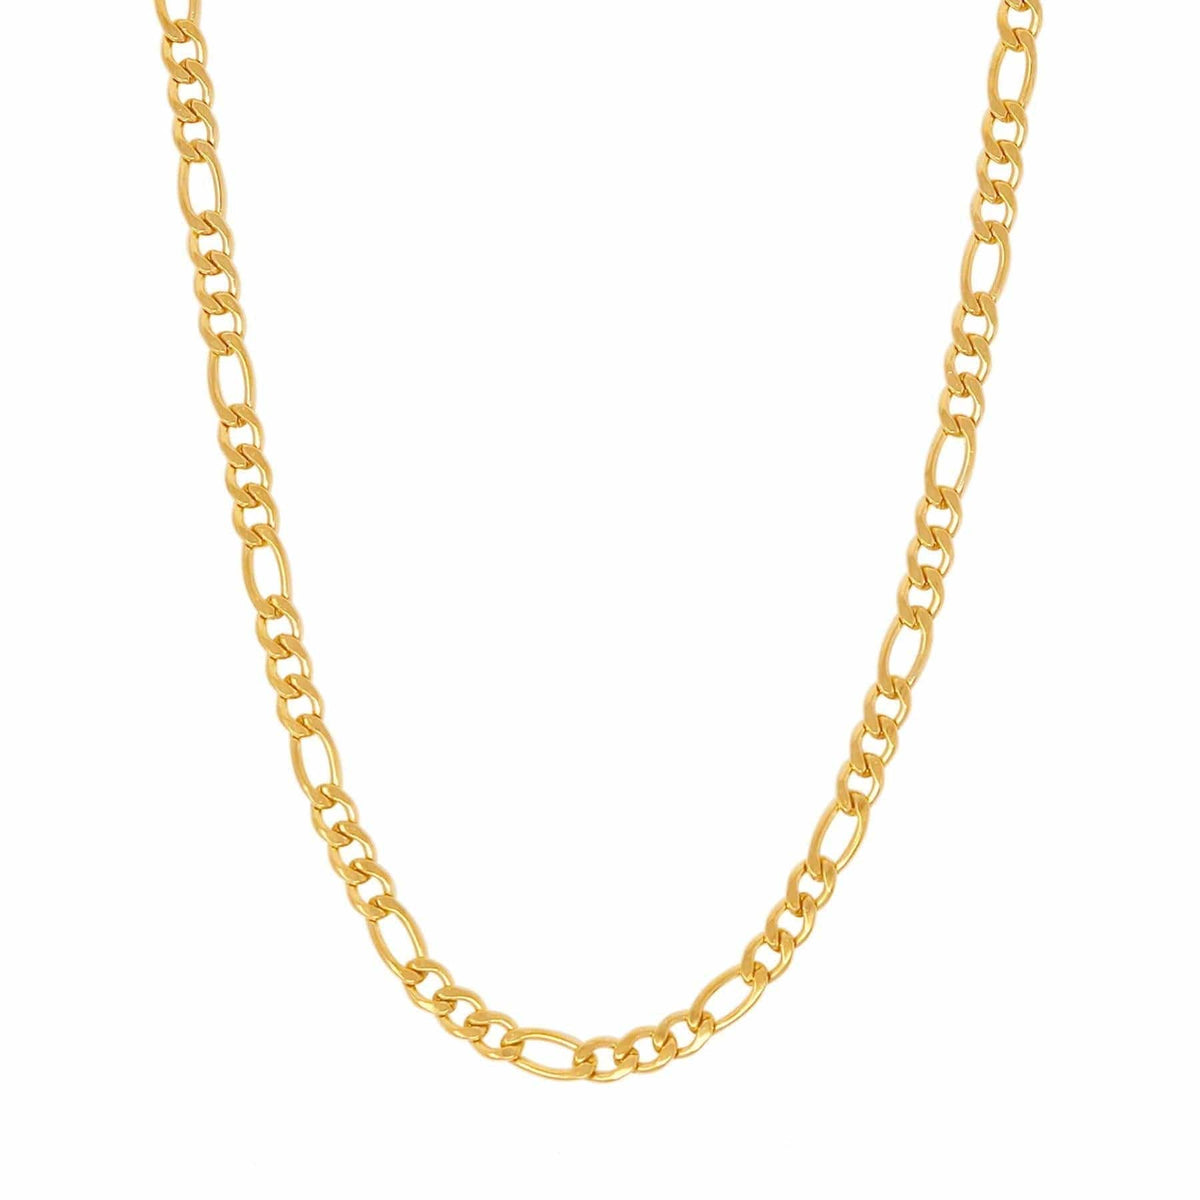 BohoMoon Stainless Steel Figaro Chain Necklace Gold / 18"